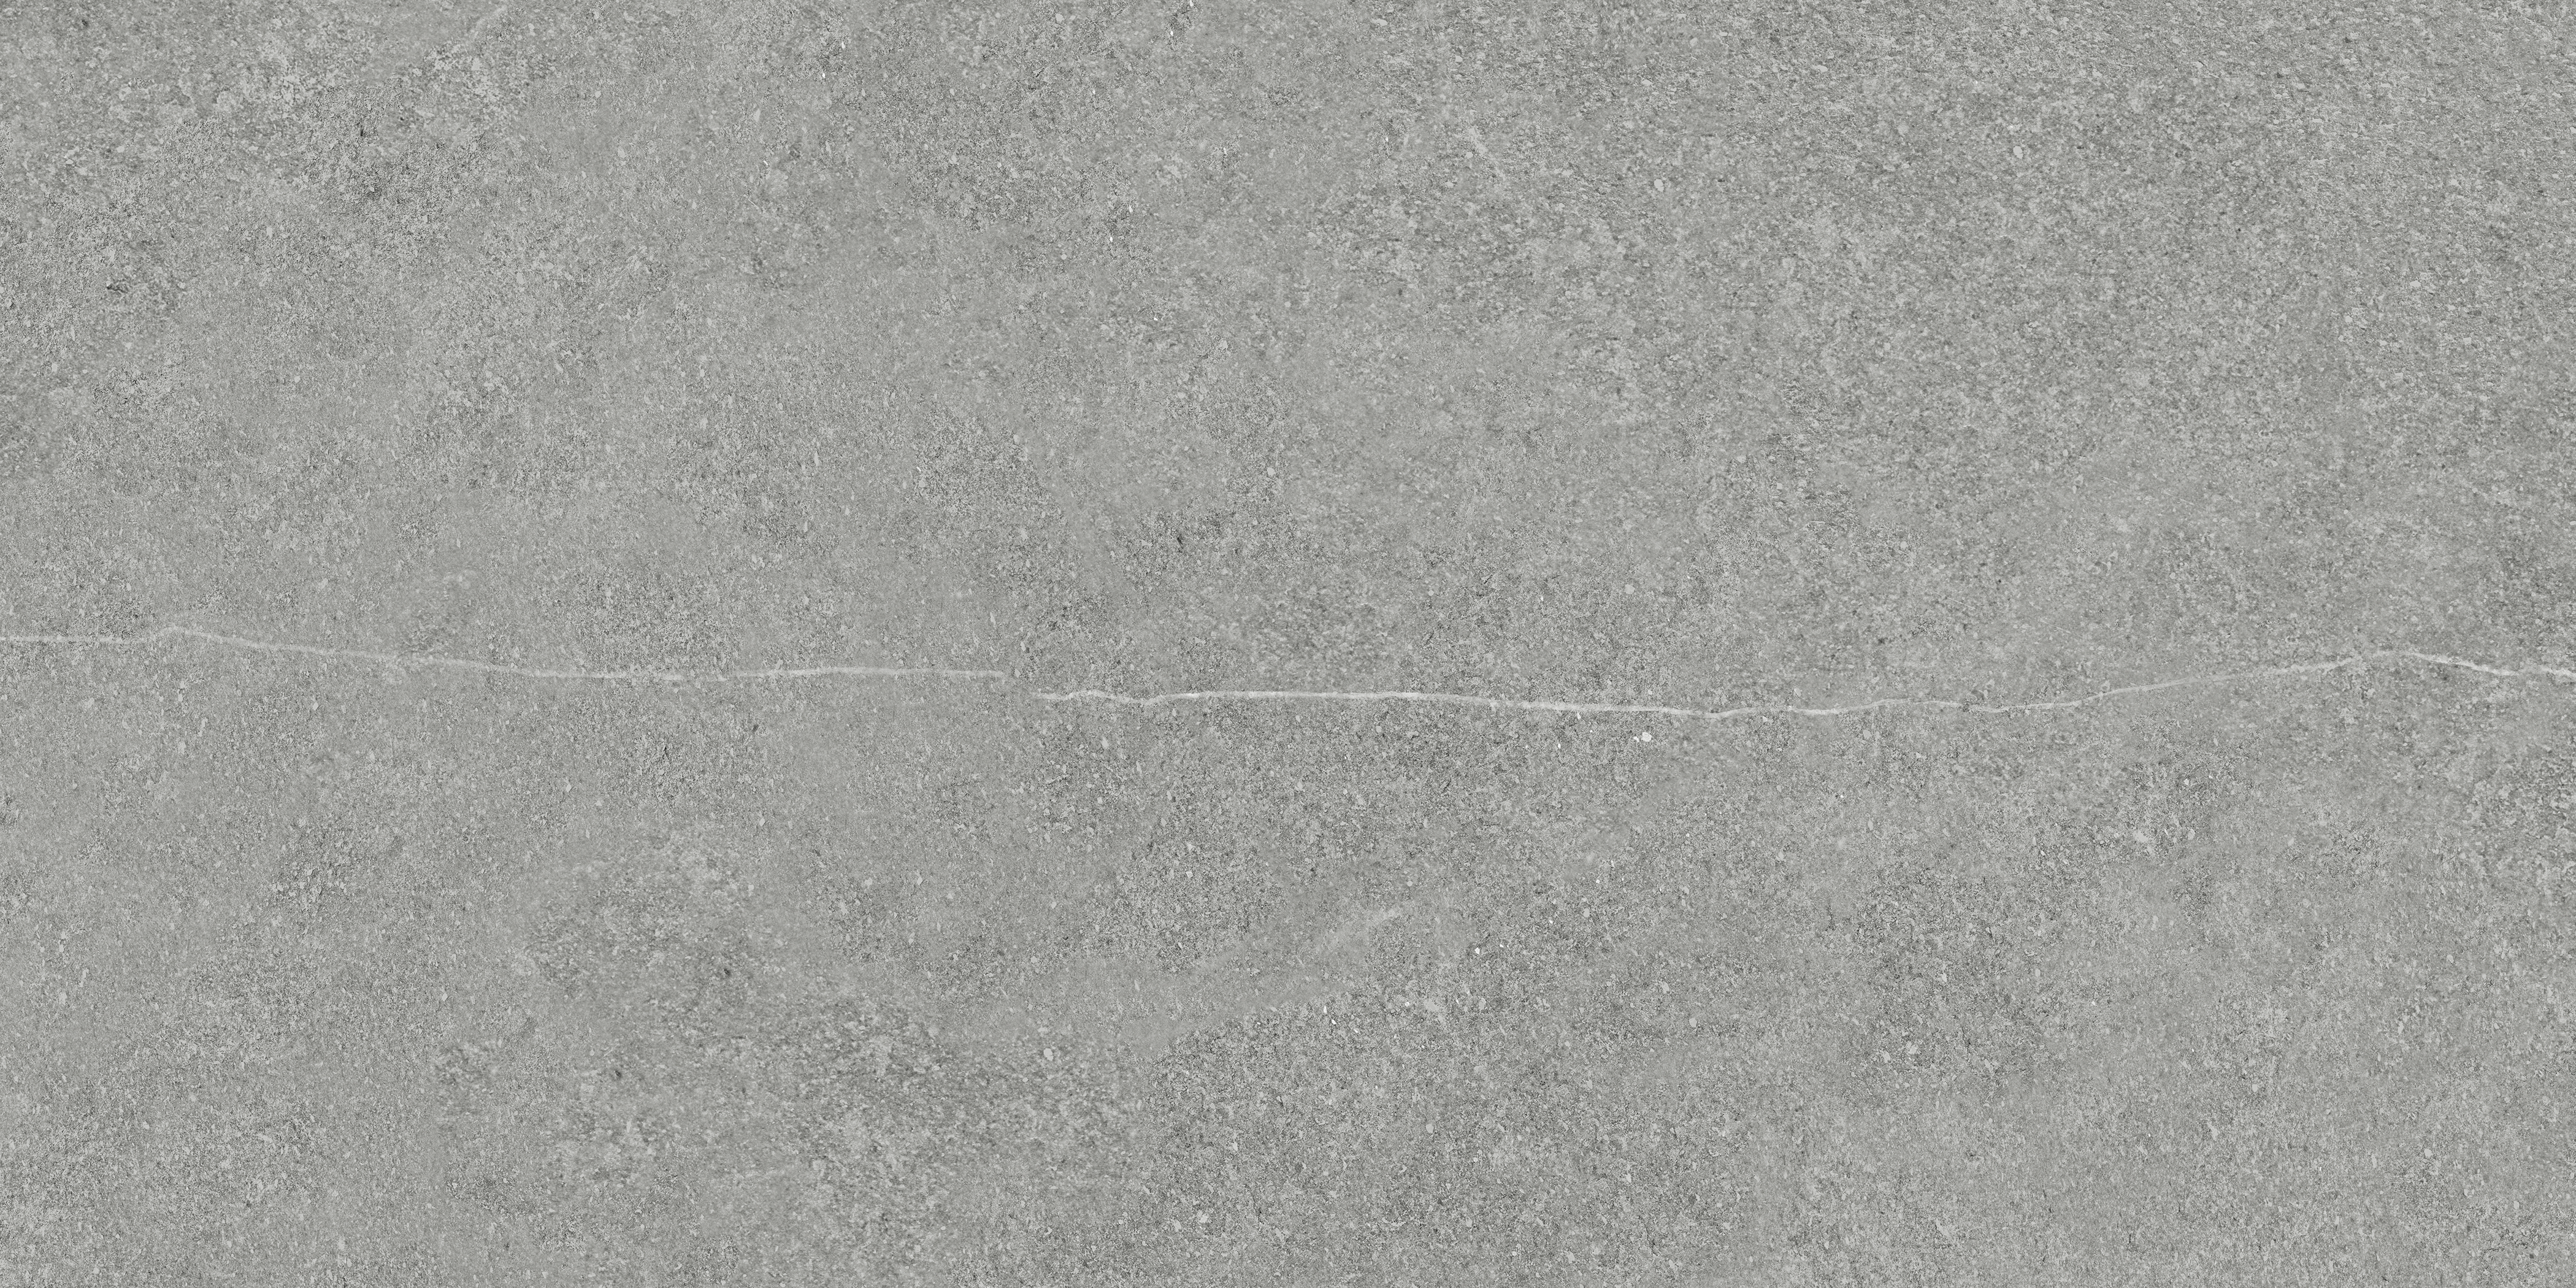 mica pattern color body porcelain field tile from mjork anatolia collection distributed by surface group international matte finish rectified edge 12x24 rectangle shape